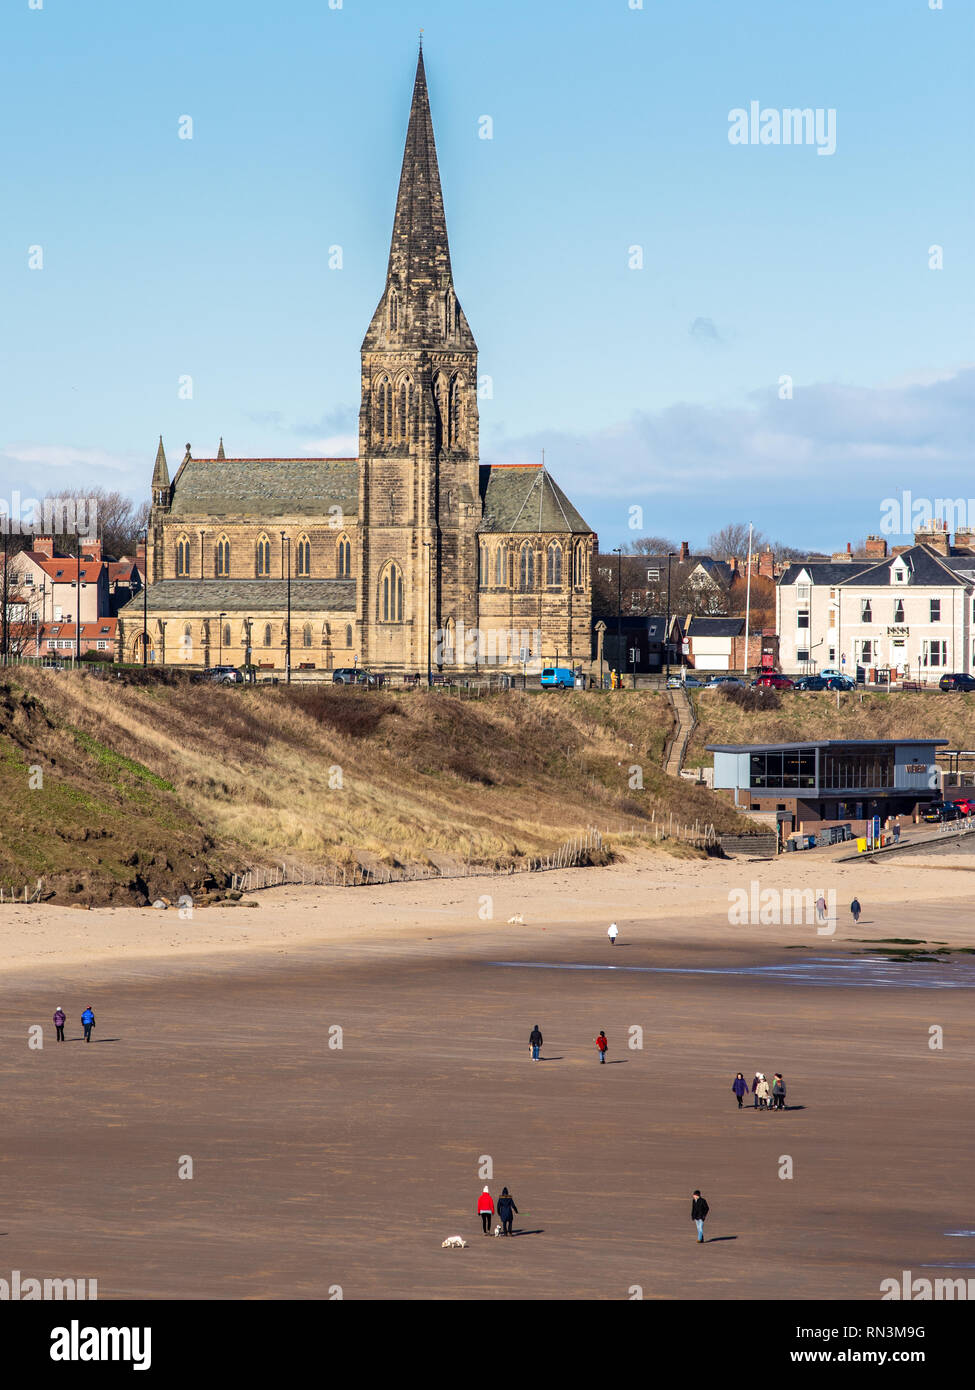 Tynemouth, England, UK - February 4, 2019: People walk their dogs on the expansive beach of Tynemouth Longsands on a sunny winter day, with Cullercoat Stock Photo